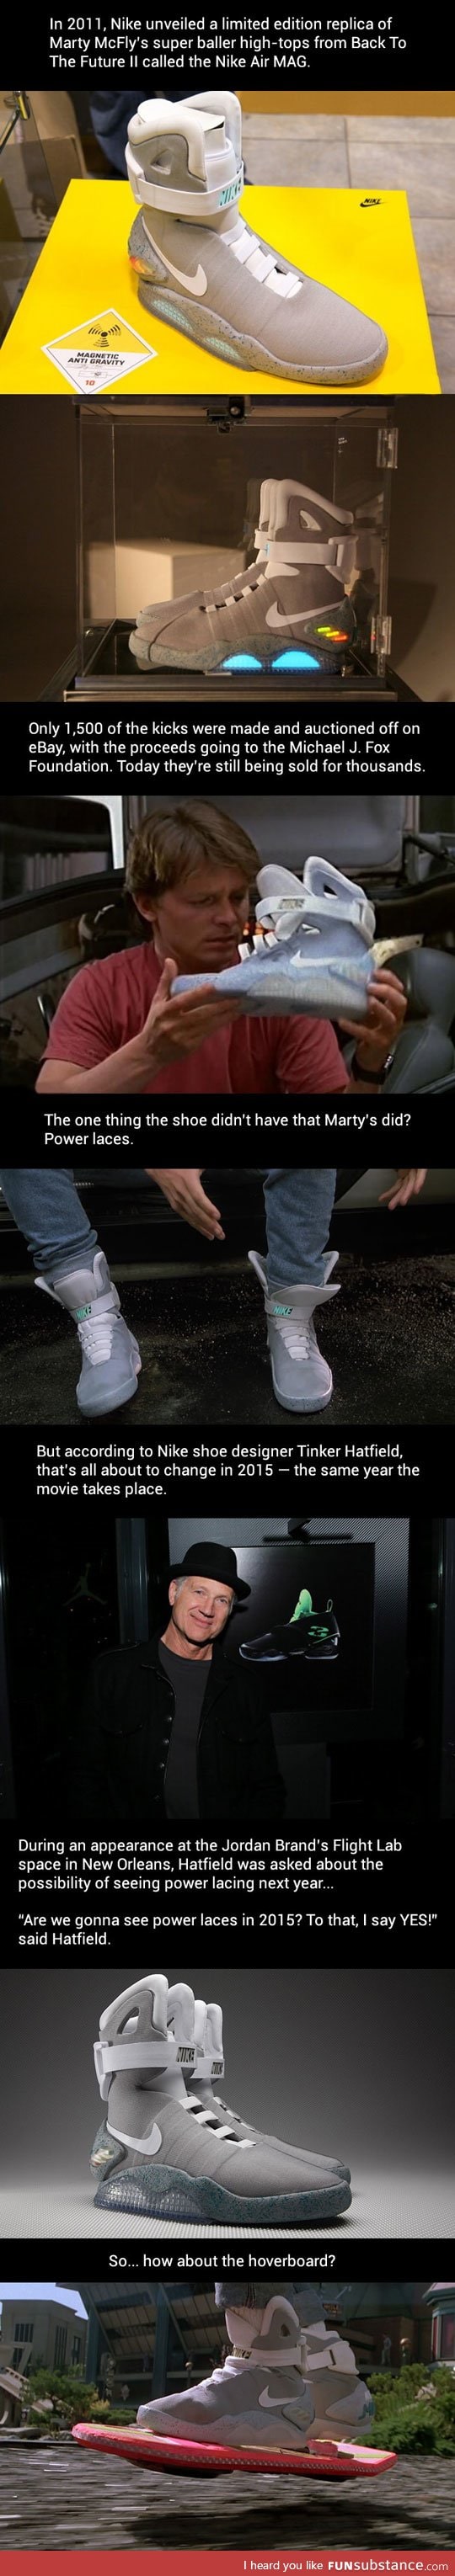 Back To The Future Power Laces For 2015